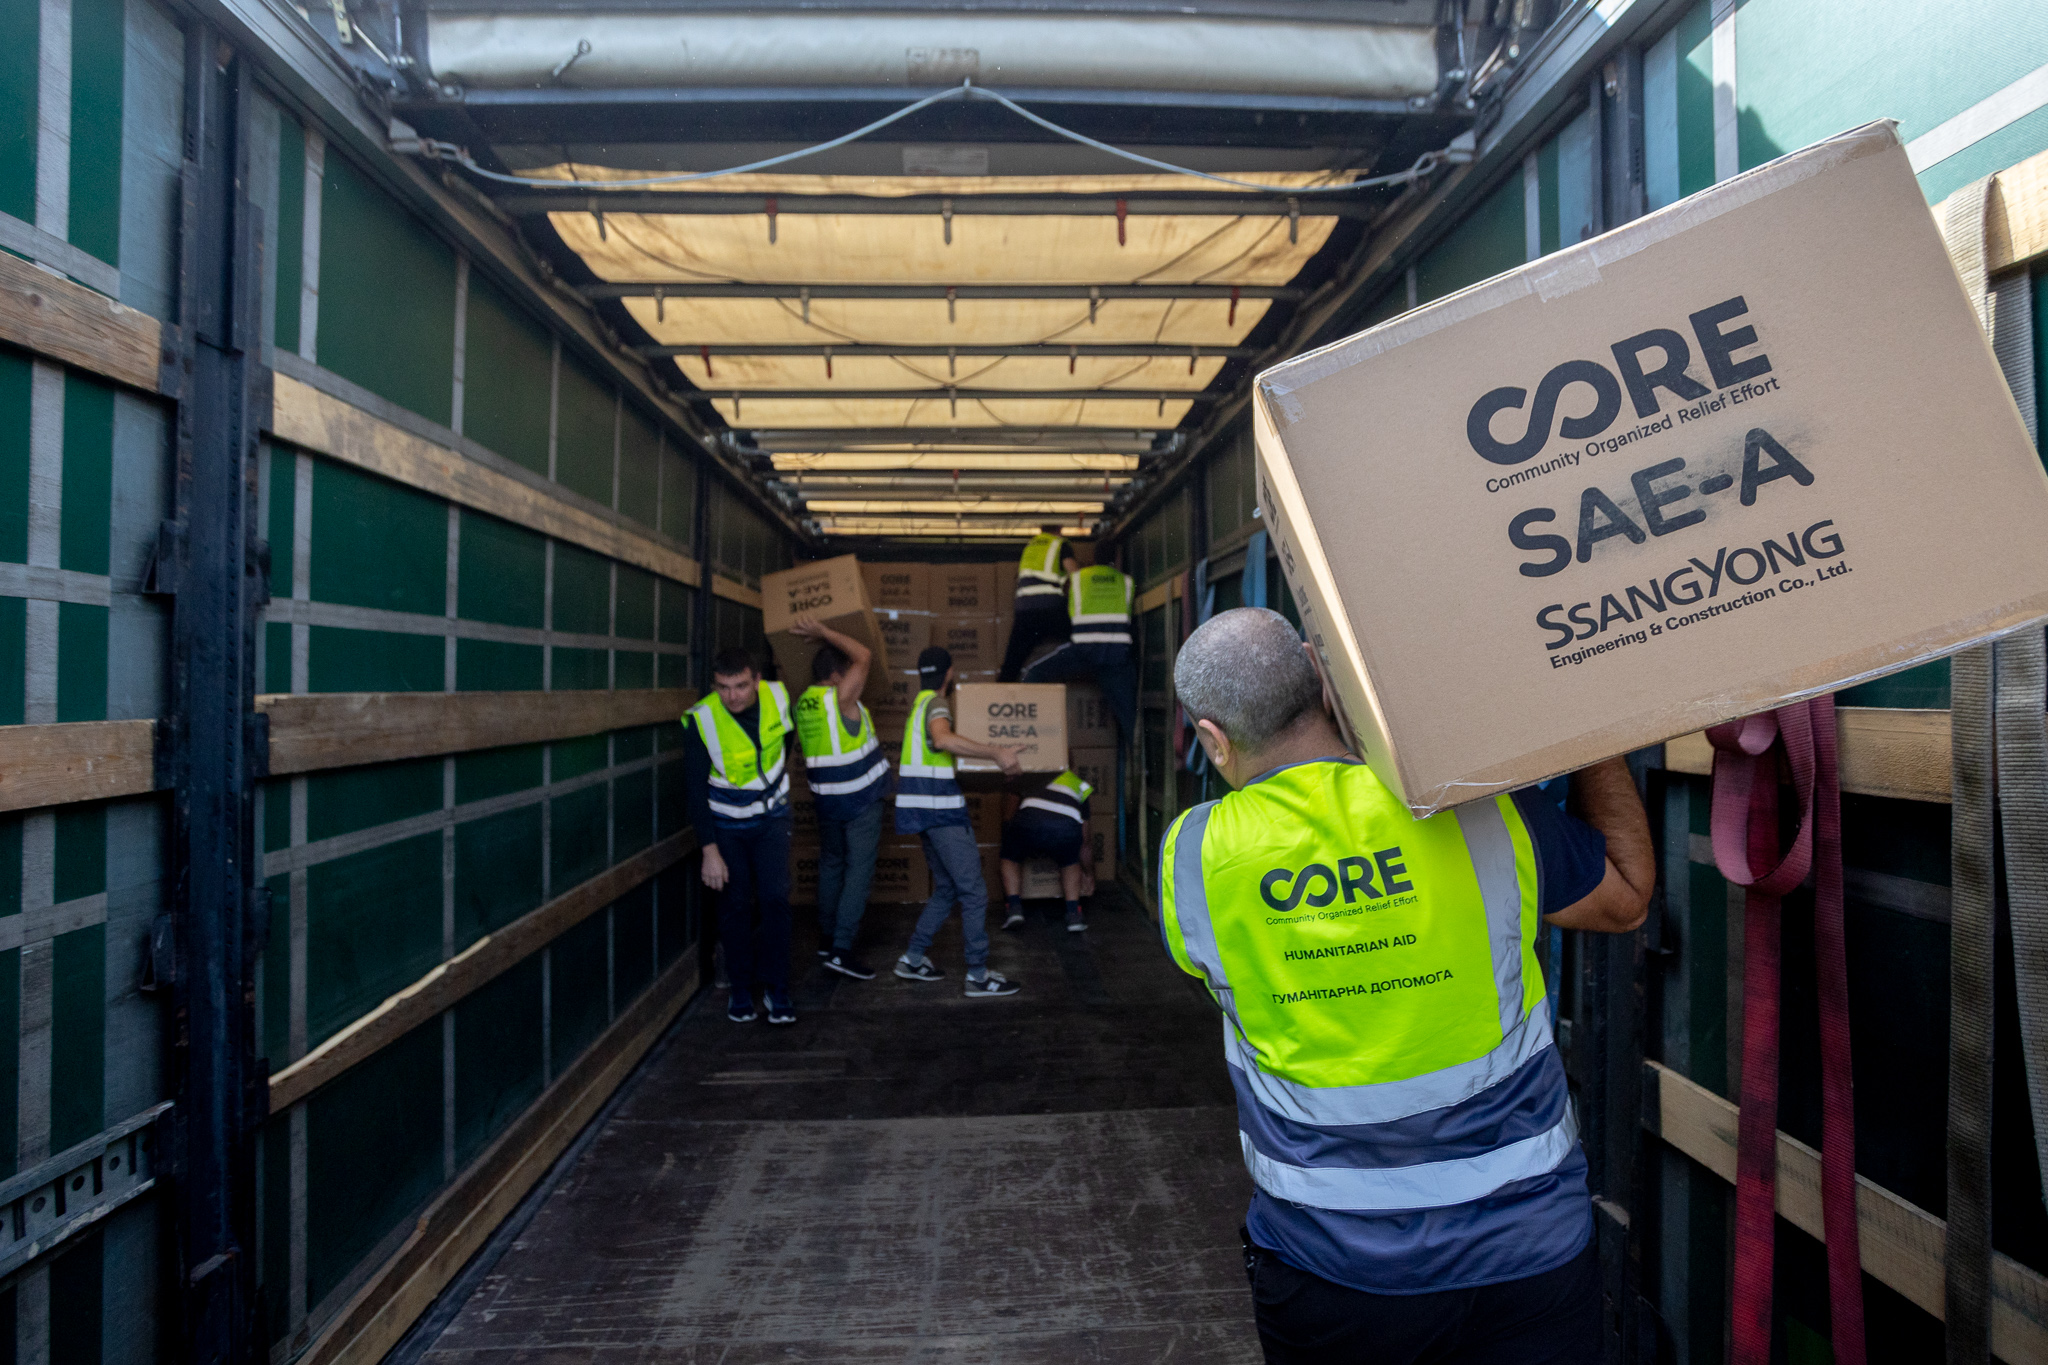 CORE team members unloading aid supplied in partnership with Sae-A and Ssangyong